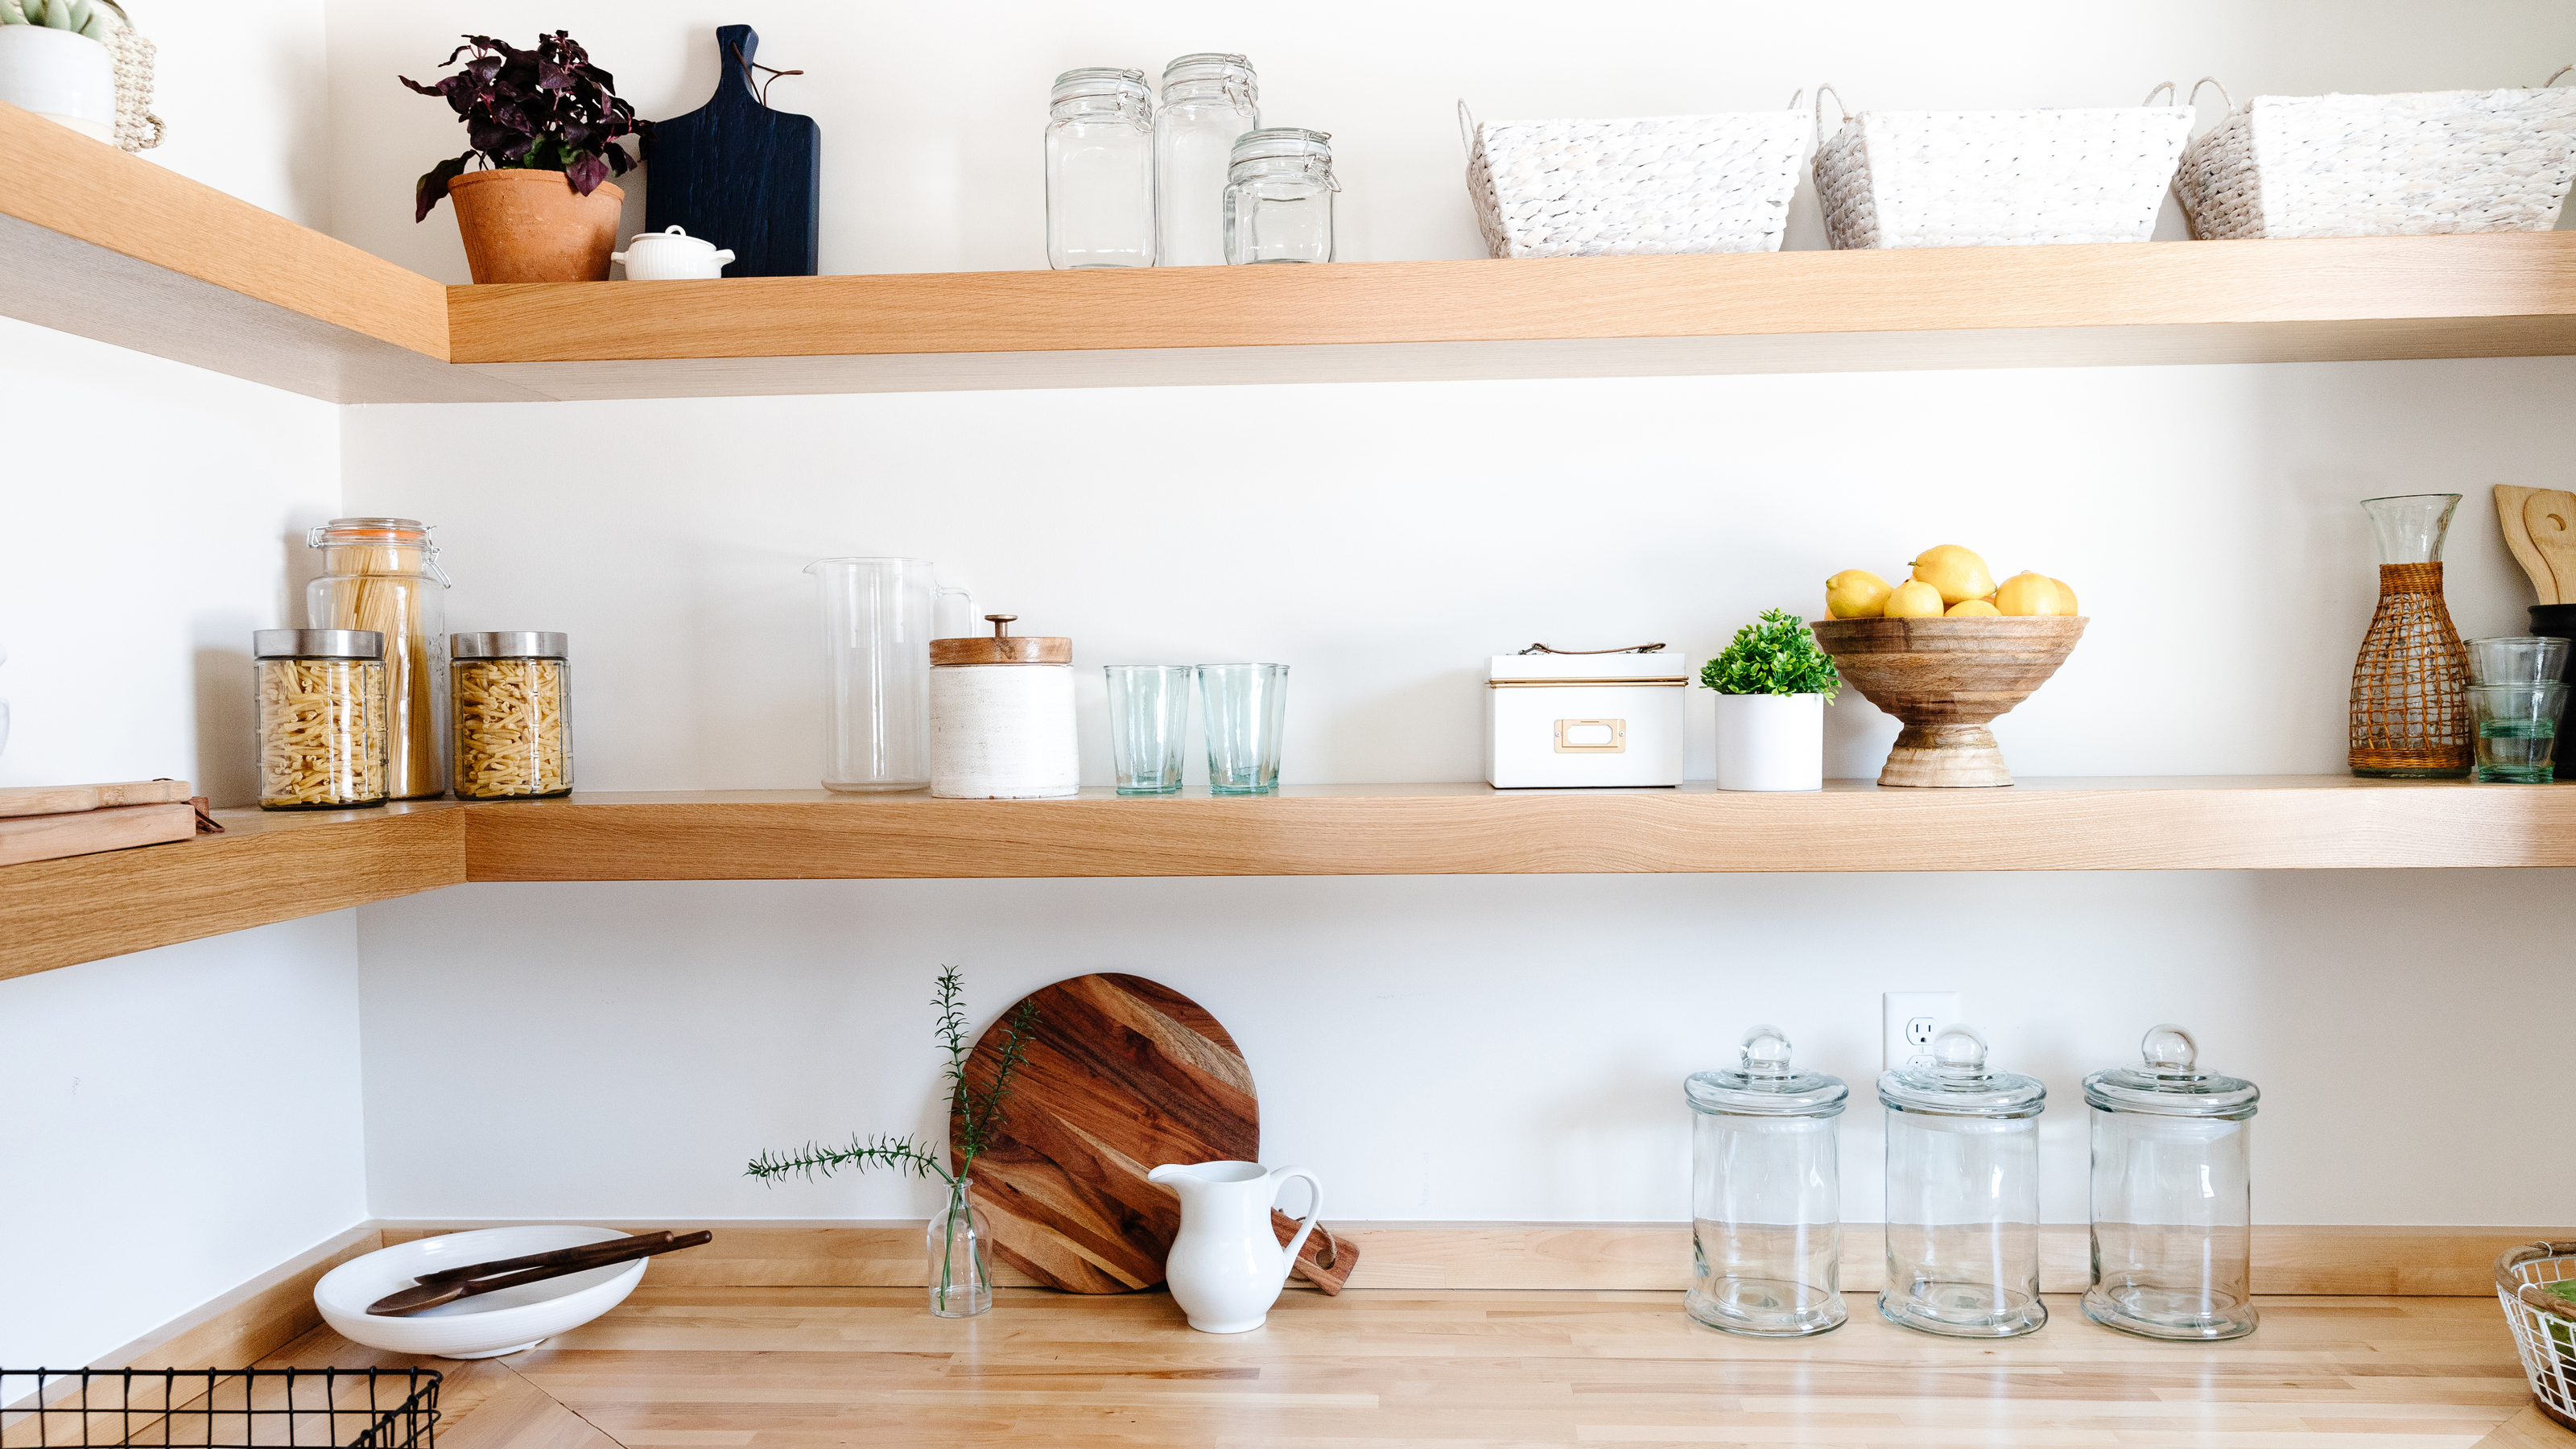 18 kitchen storage ideas to organize your home's hotspot   Real Homes